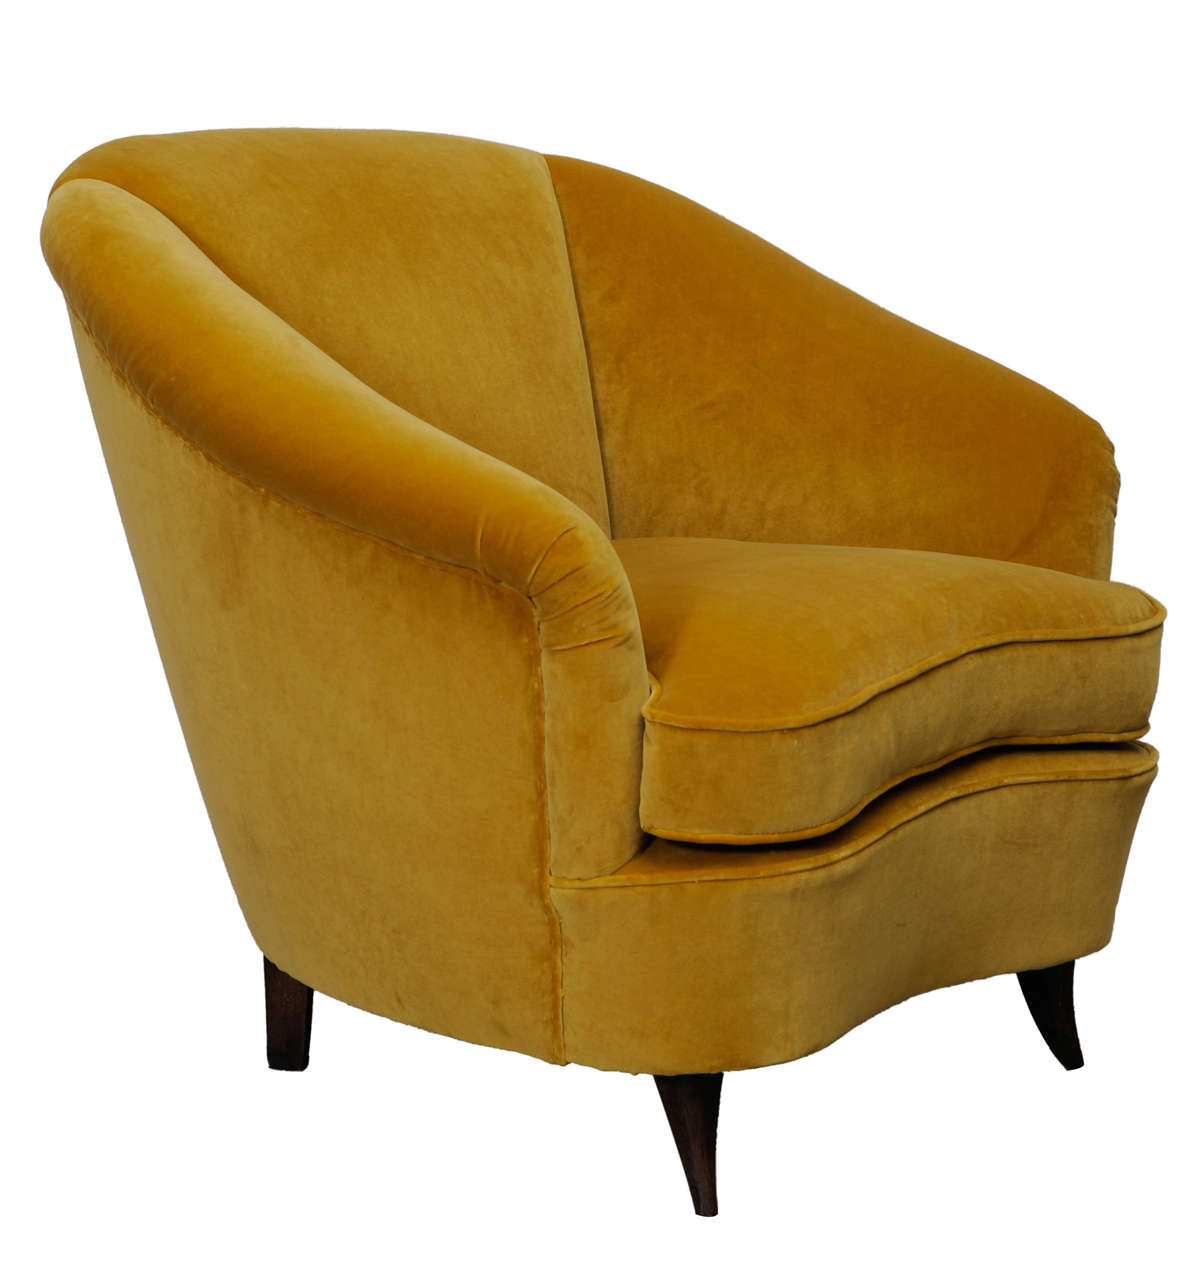 Pair of armchairs with golden yellow velvet upholstery, mahogany wood feet.